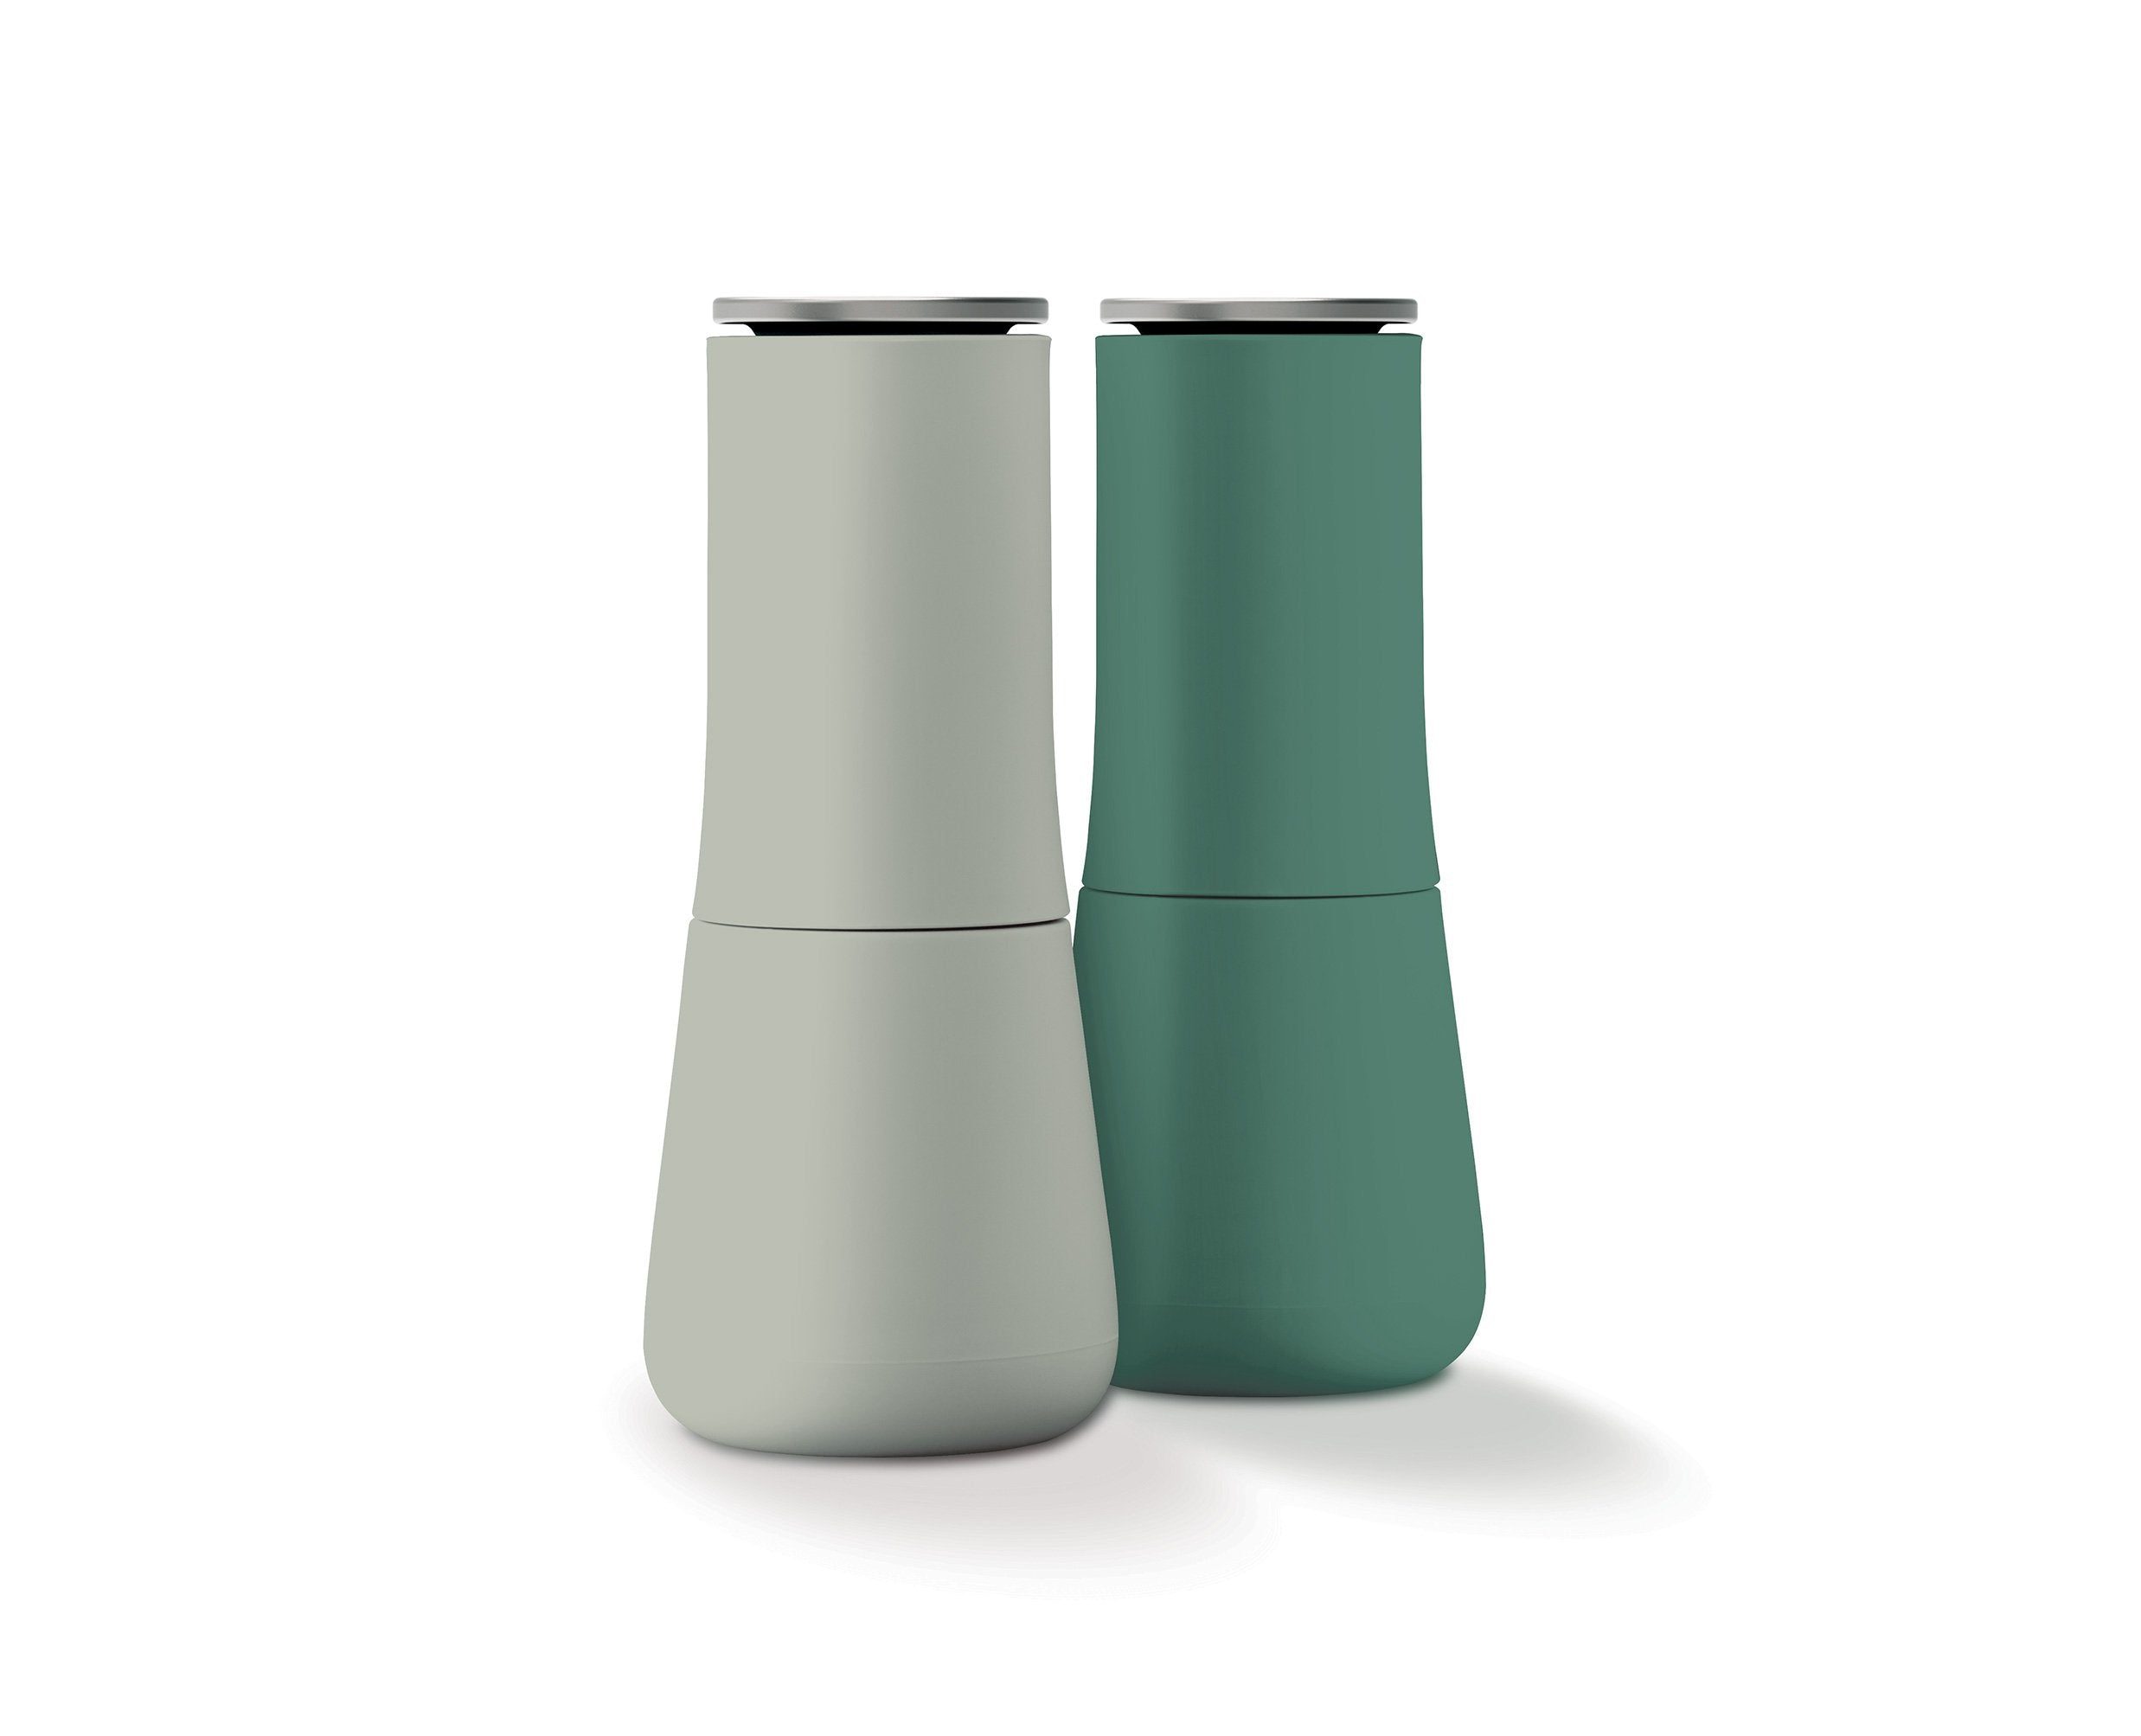 BEON.COM.AU Product Details Create a statement piece on your counter top with our Milltop™ Salt & Pepper Mills now available in the hues of green of our Editions range. The clever design of these elegant salt and pepper mills means the grinding mechanism is at the top so any excess grounds fall back insi... Joseph Joseph at BEON.COM.AU